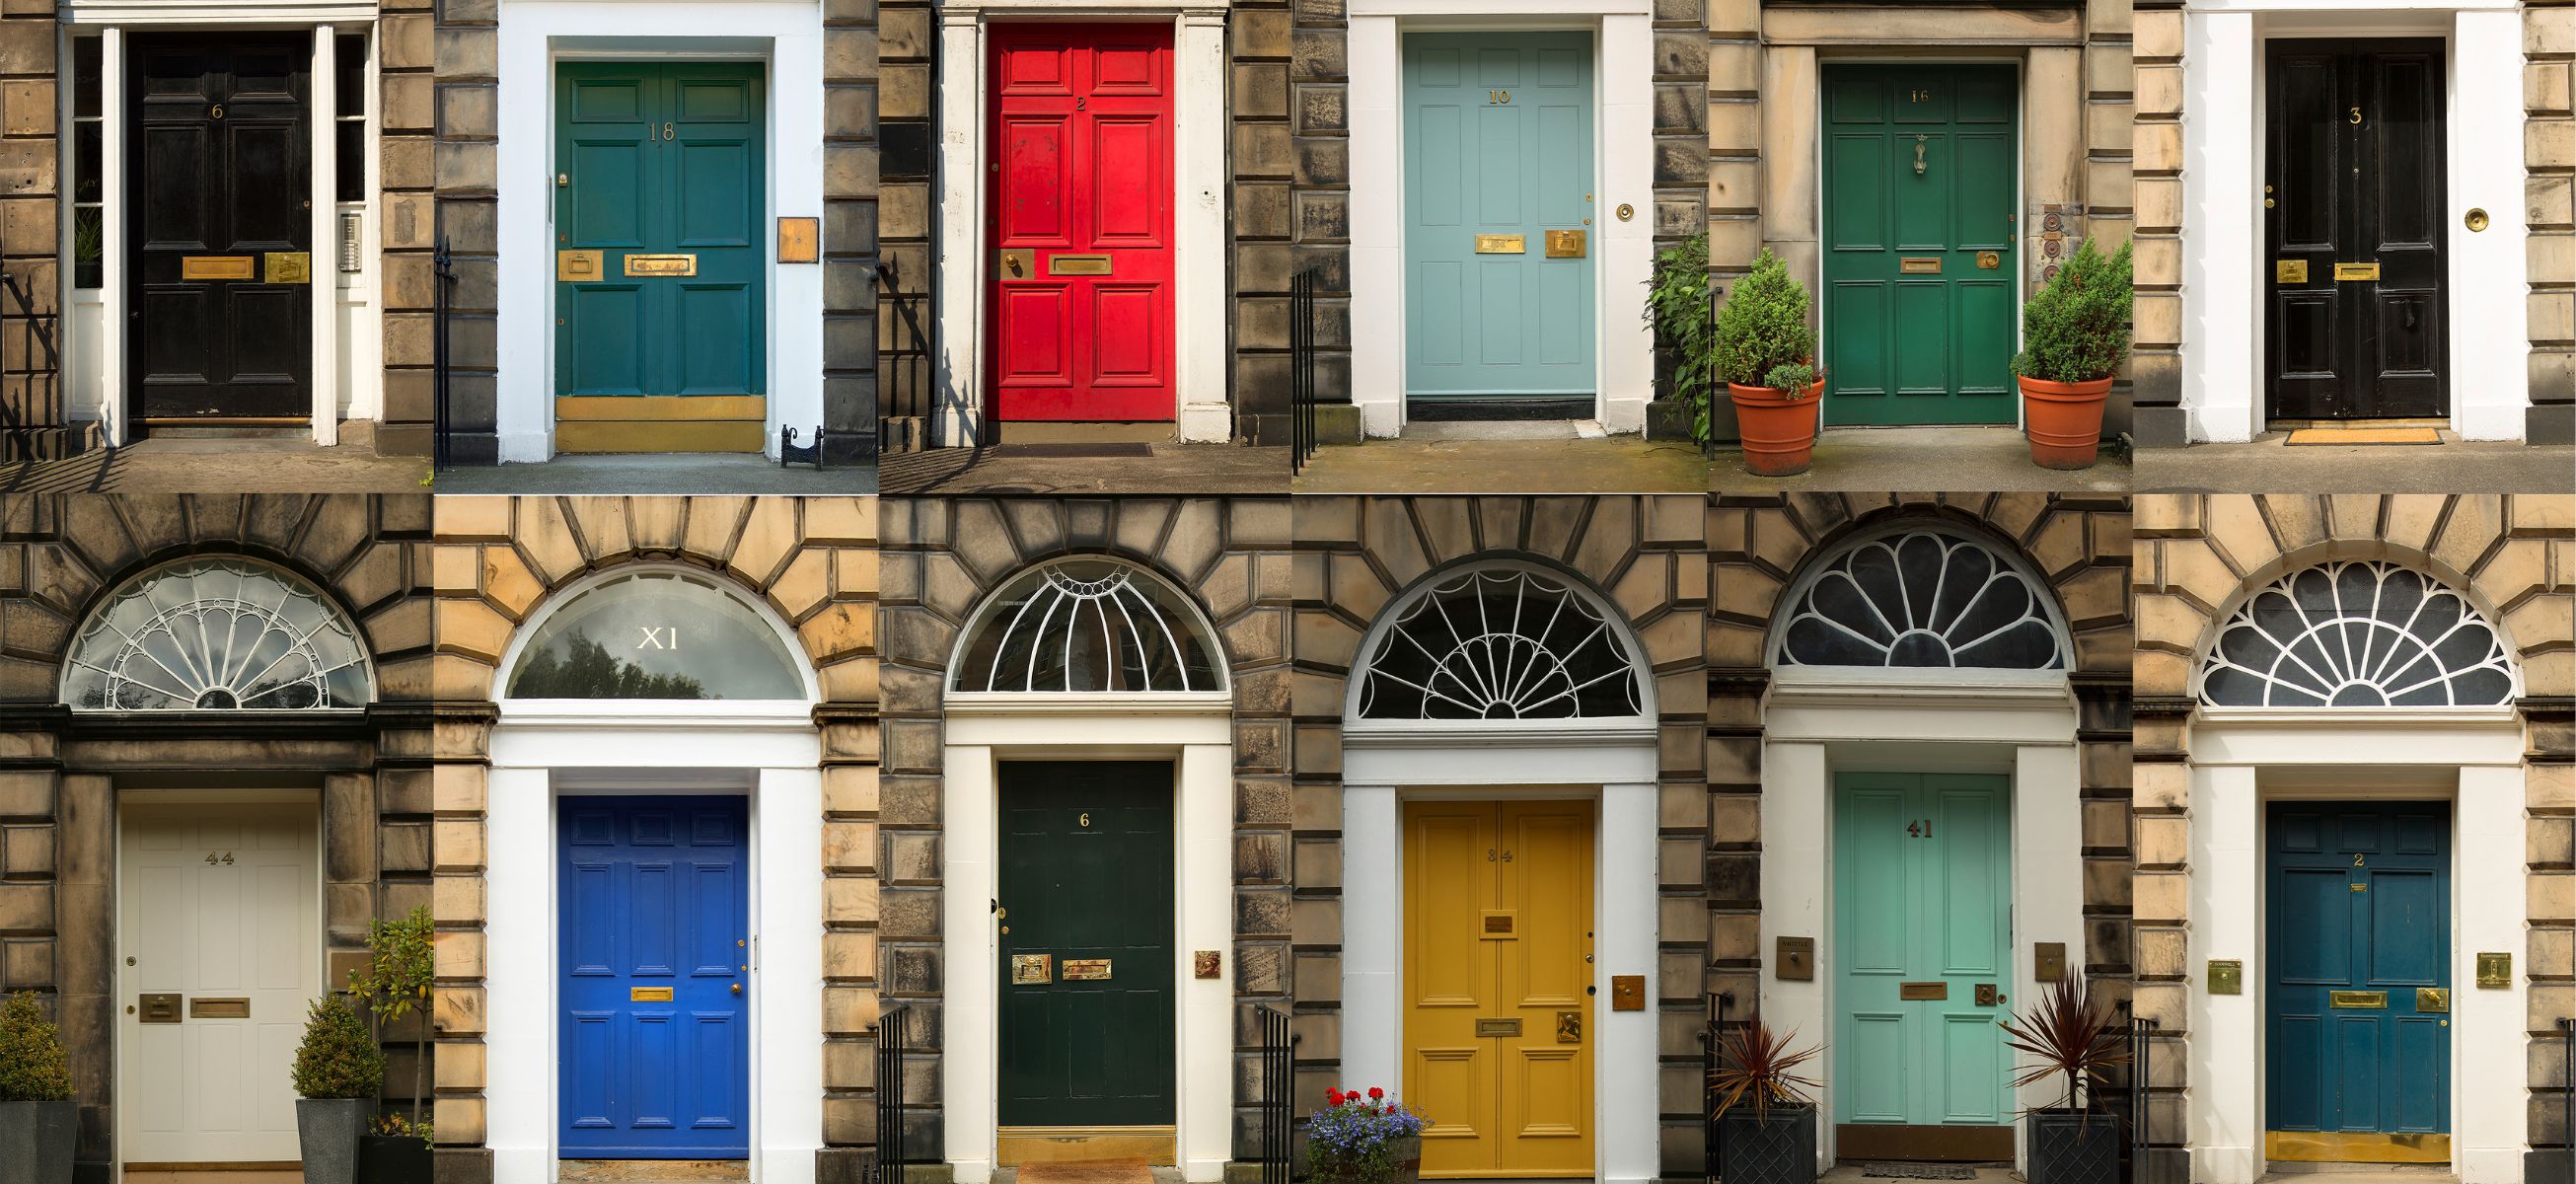 Do front door colors mean anything 7 popular colors and the meaning behind each one